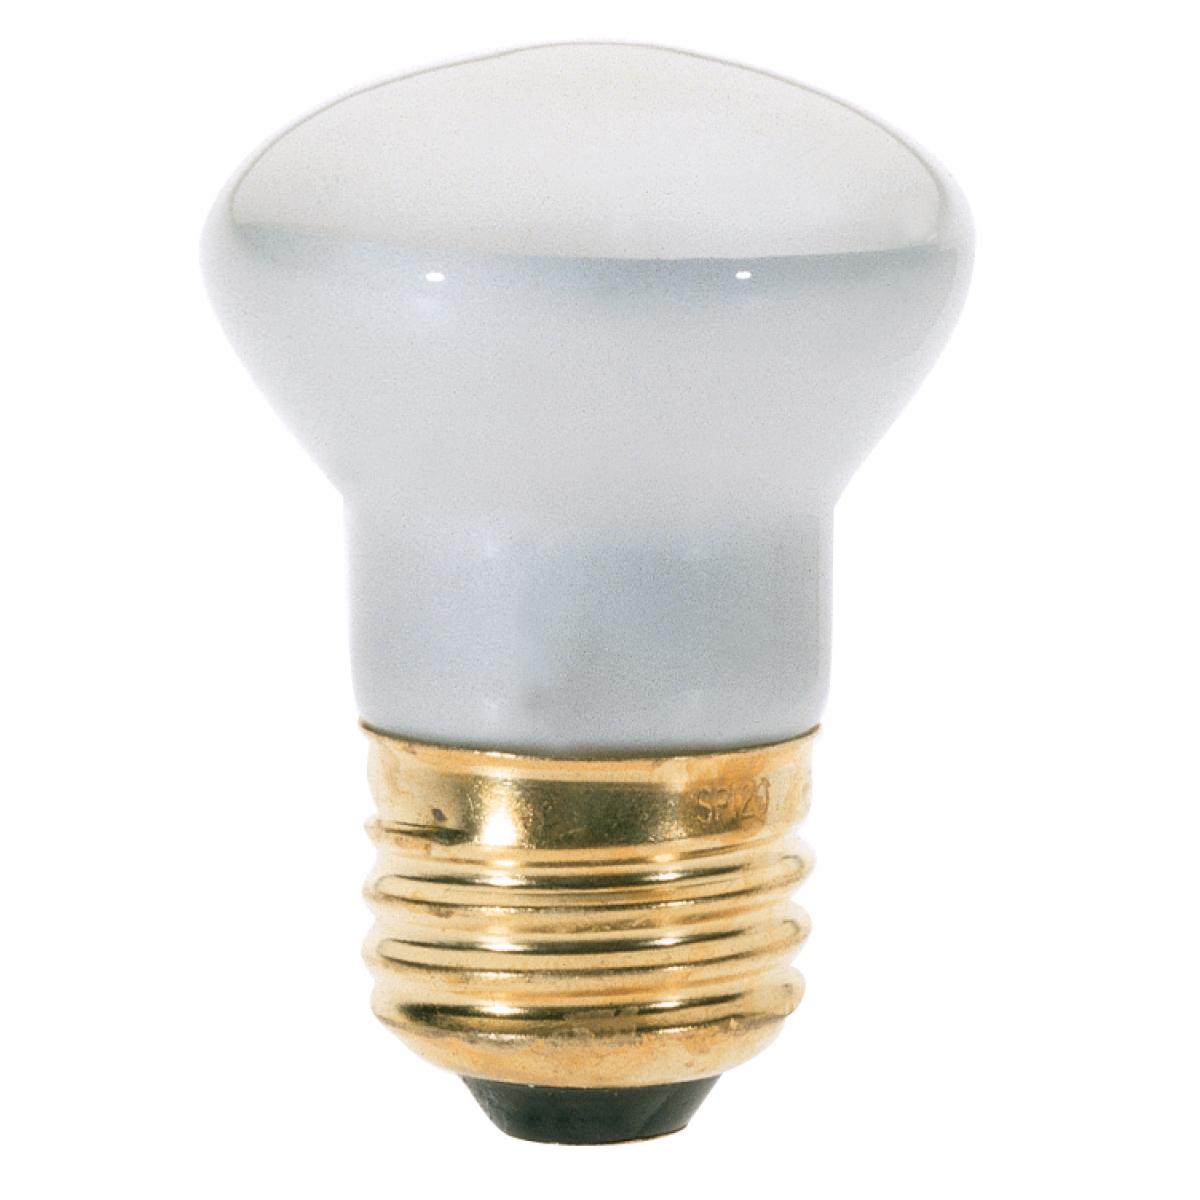 Satco S4705 40 Watt R14 Incandescent Frost 1500 Average rated hours 280 Lumens Medium base 120 Volt Carded